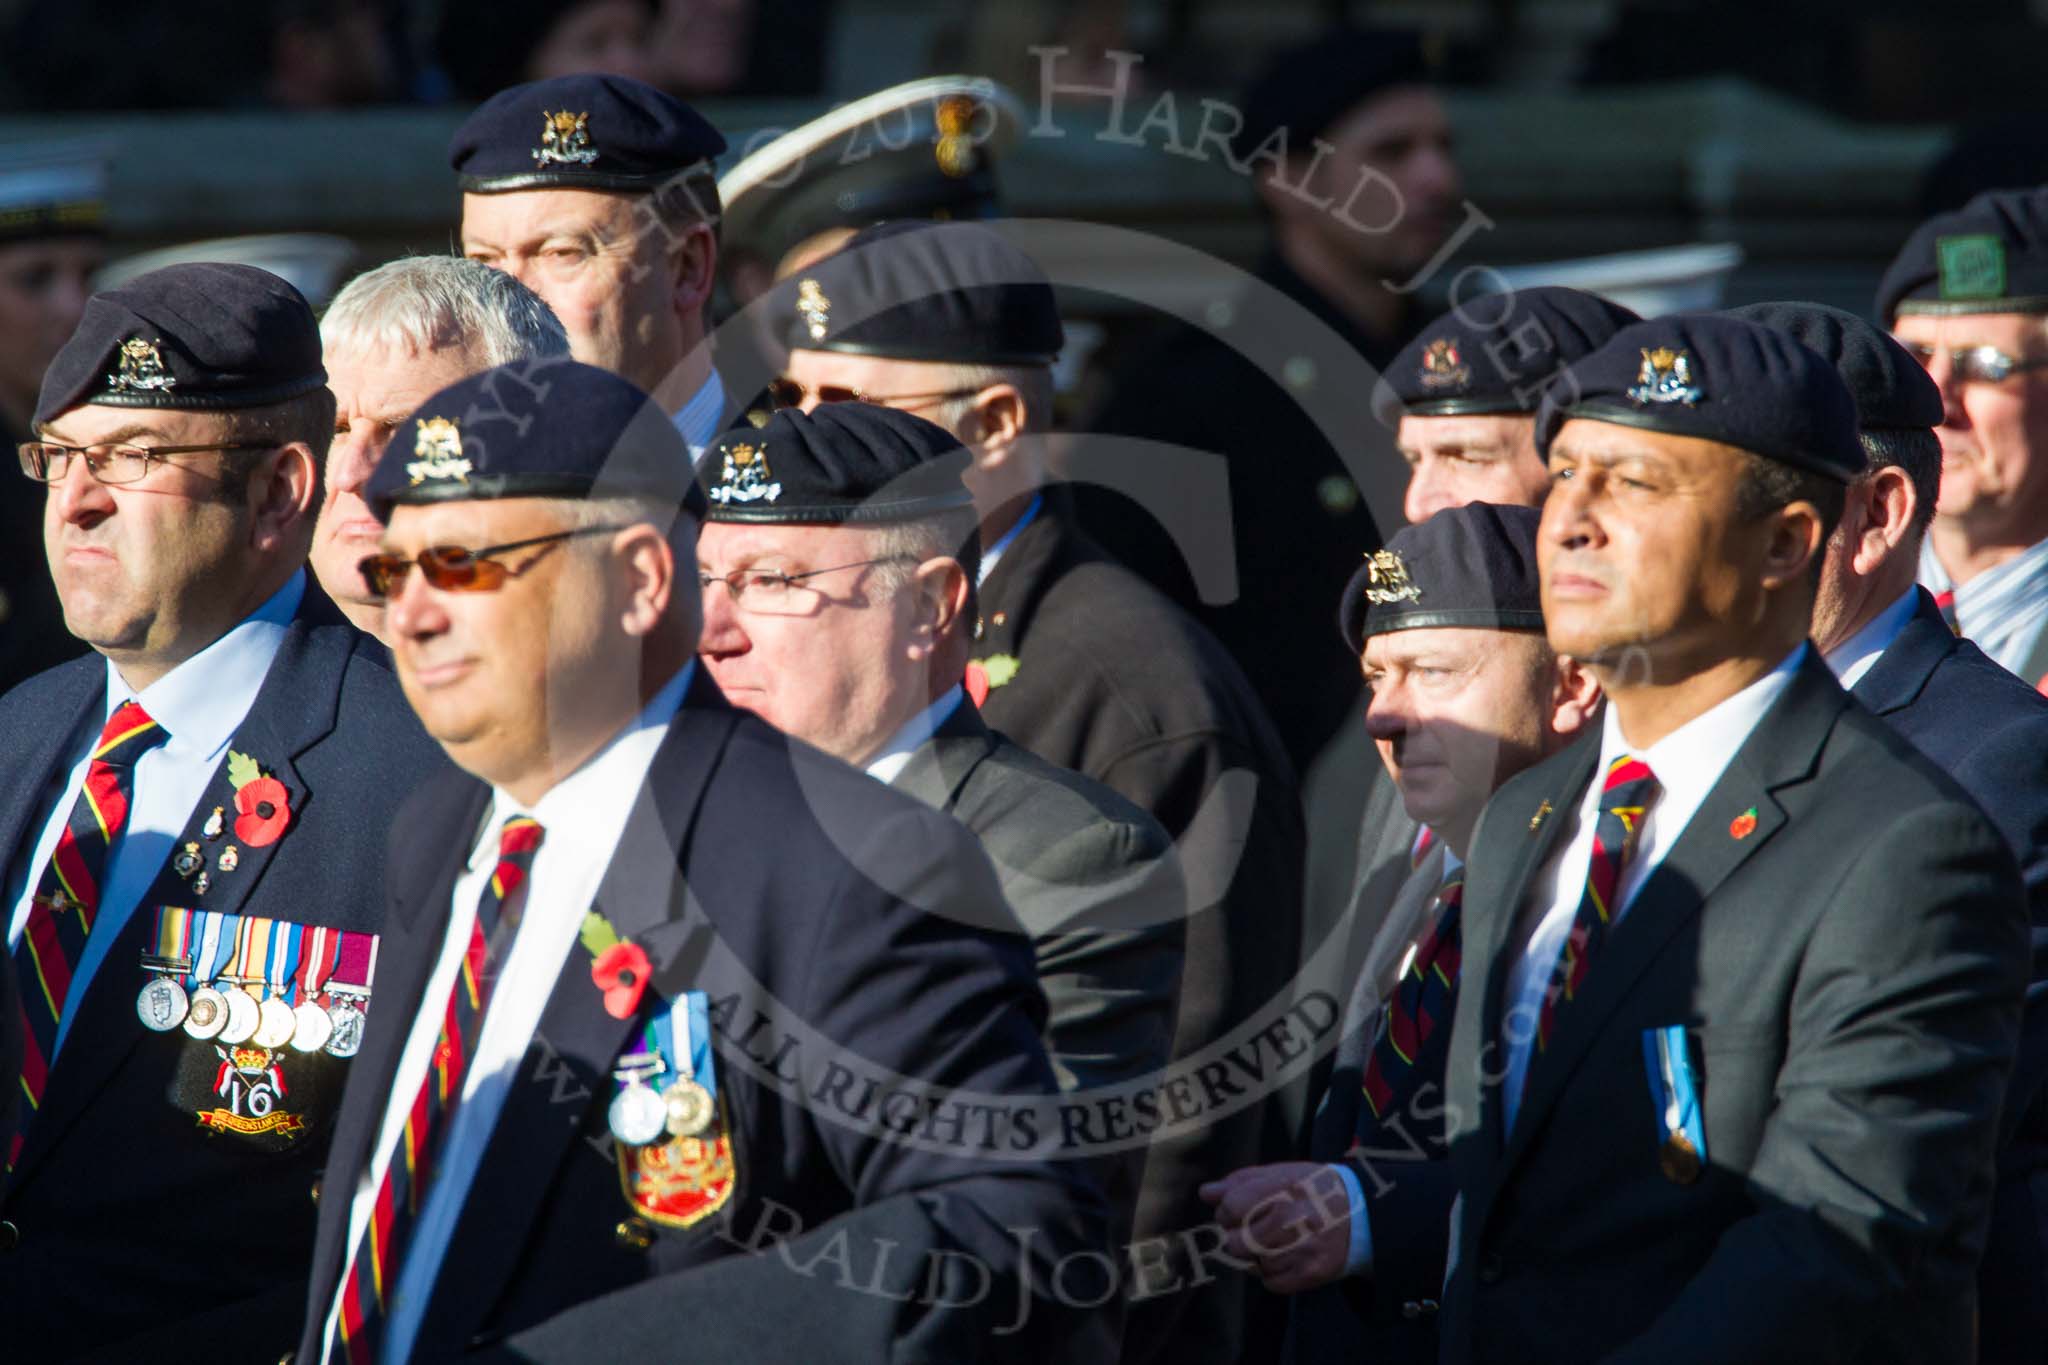 Remembrance Sunday at the Cenotaph in London 2014: Group B30 - 16/5th Queen's Royal Lancers.
Press stand opposite the Foreign Office building, Whitehall, London SW1,
London,
Greater London,
United Kingdom,
on 09 November 2014 at 12:13, image #1901